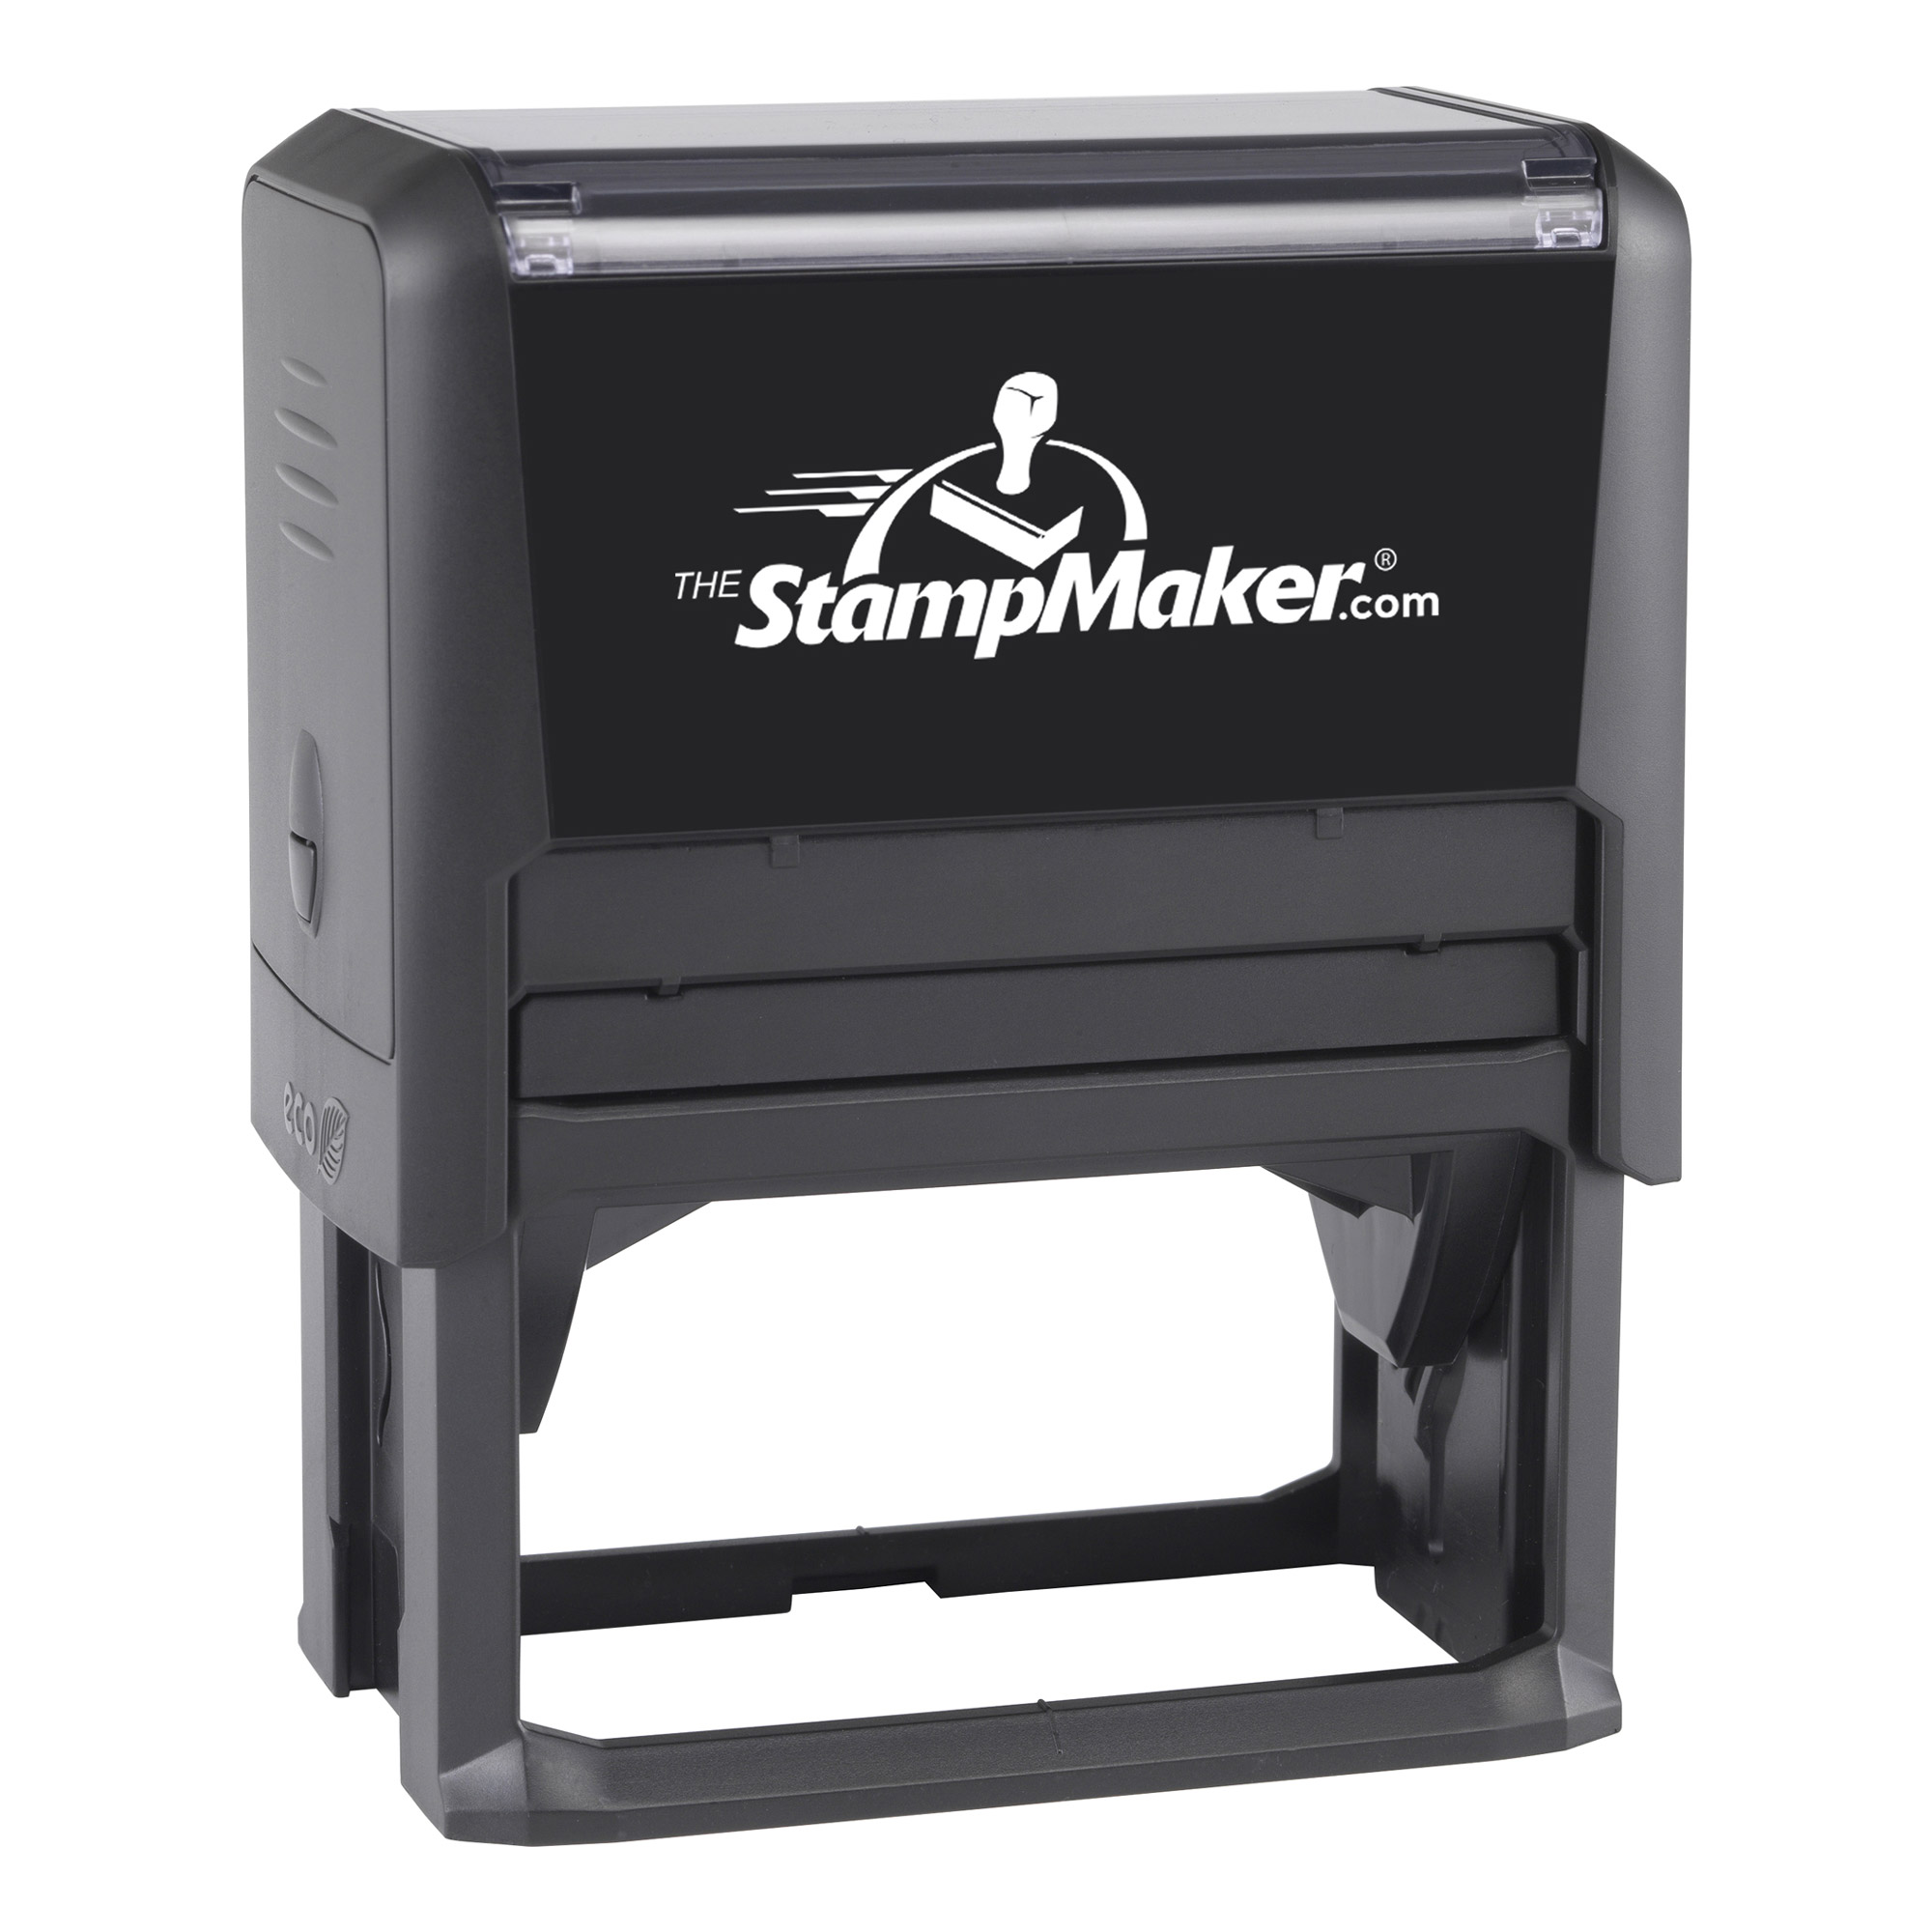 Trodat 4926 Extra Large Self Inking Rubber Stamp Customized with your unique text